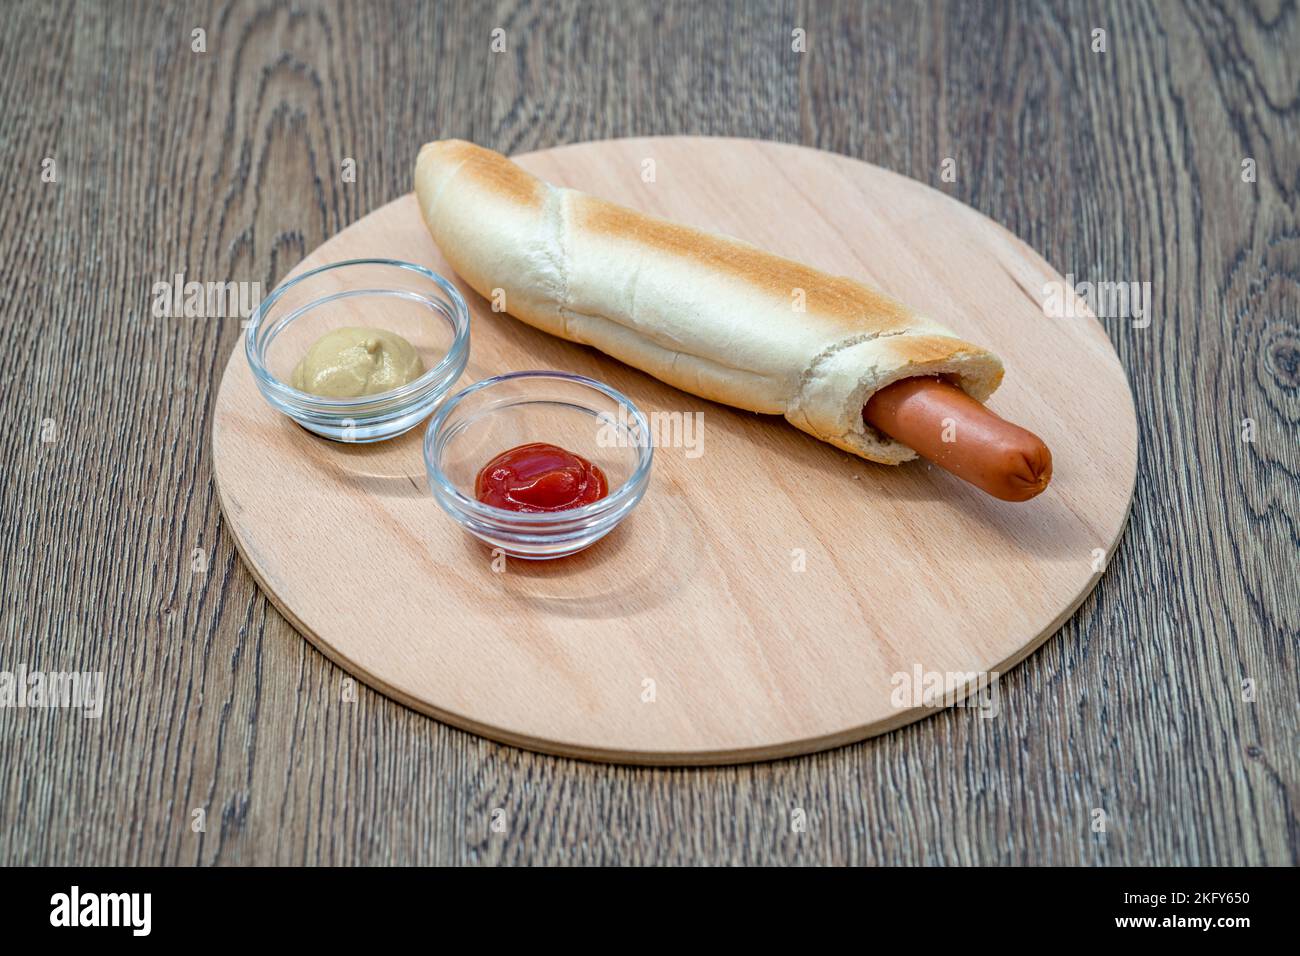 hot dog in a roll with mustard and ketchup Stock Photo